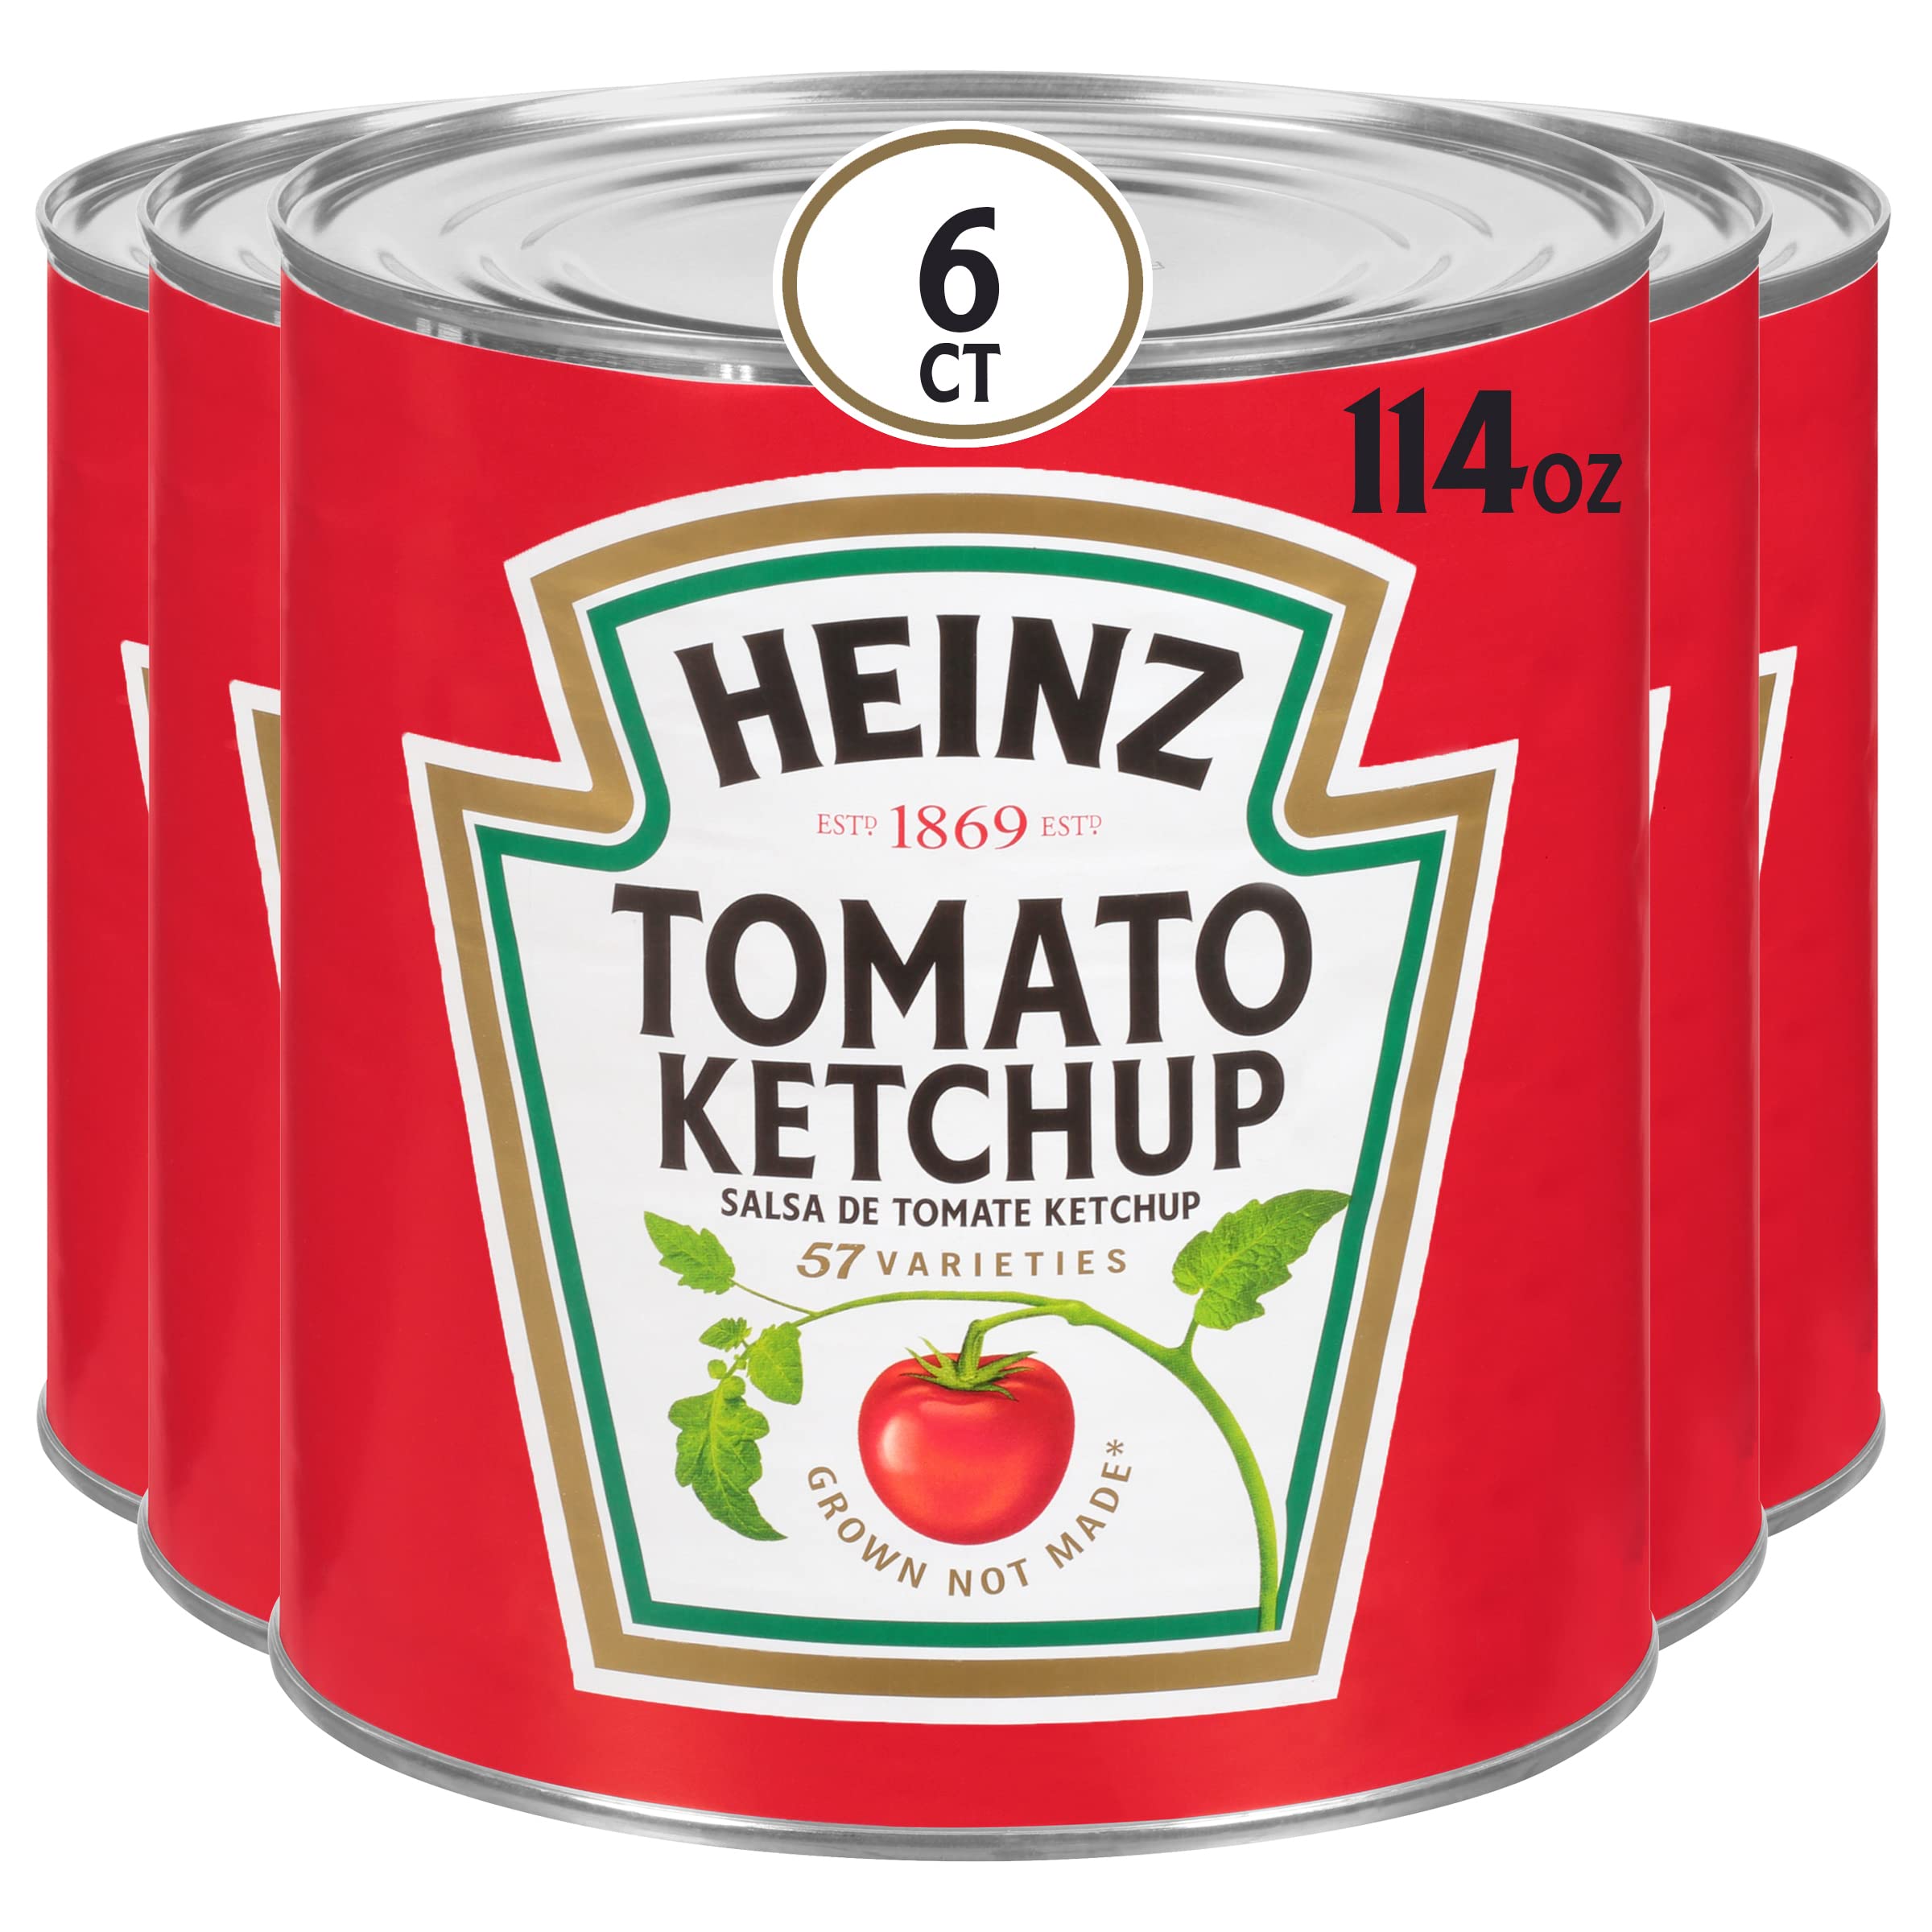 Heinz Tomato Ketchup (6 ct Casepack, 7.1 lb Cans)